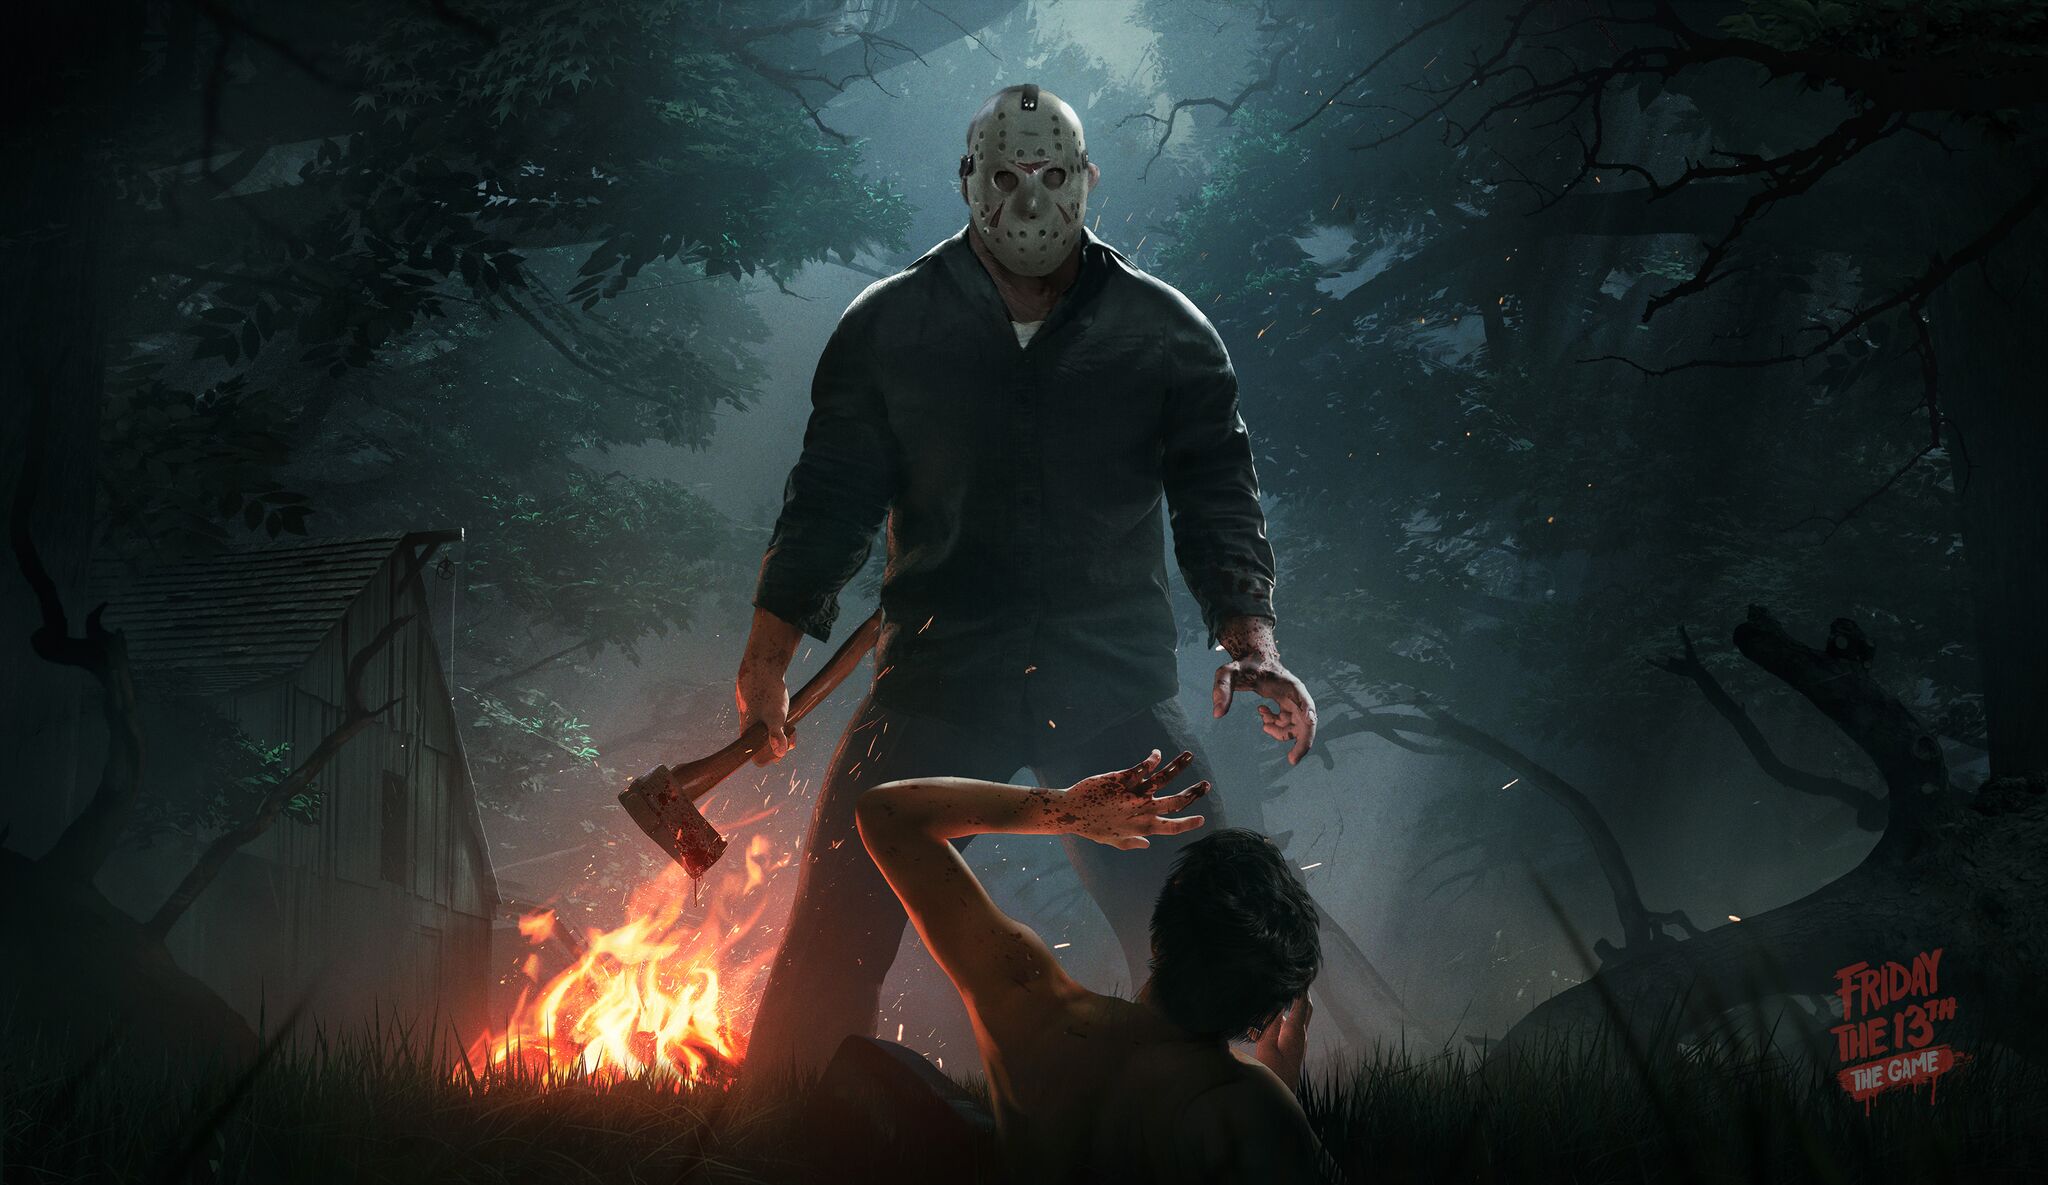  Friday the 13: The Game has been killed one more time: Fan-made 'Resurrection' project derailed by lawyers over 'cavalier disregard of copyright law' 